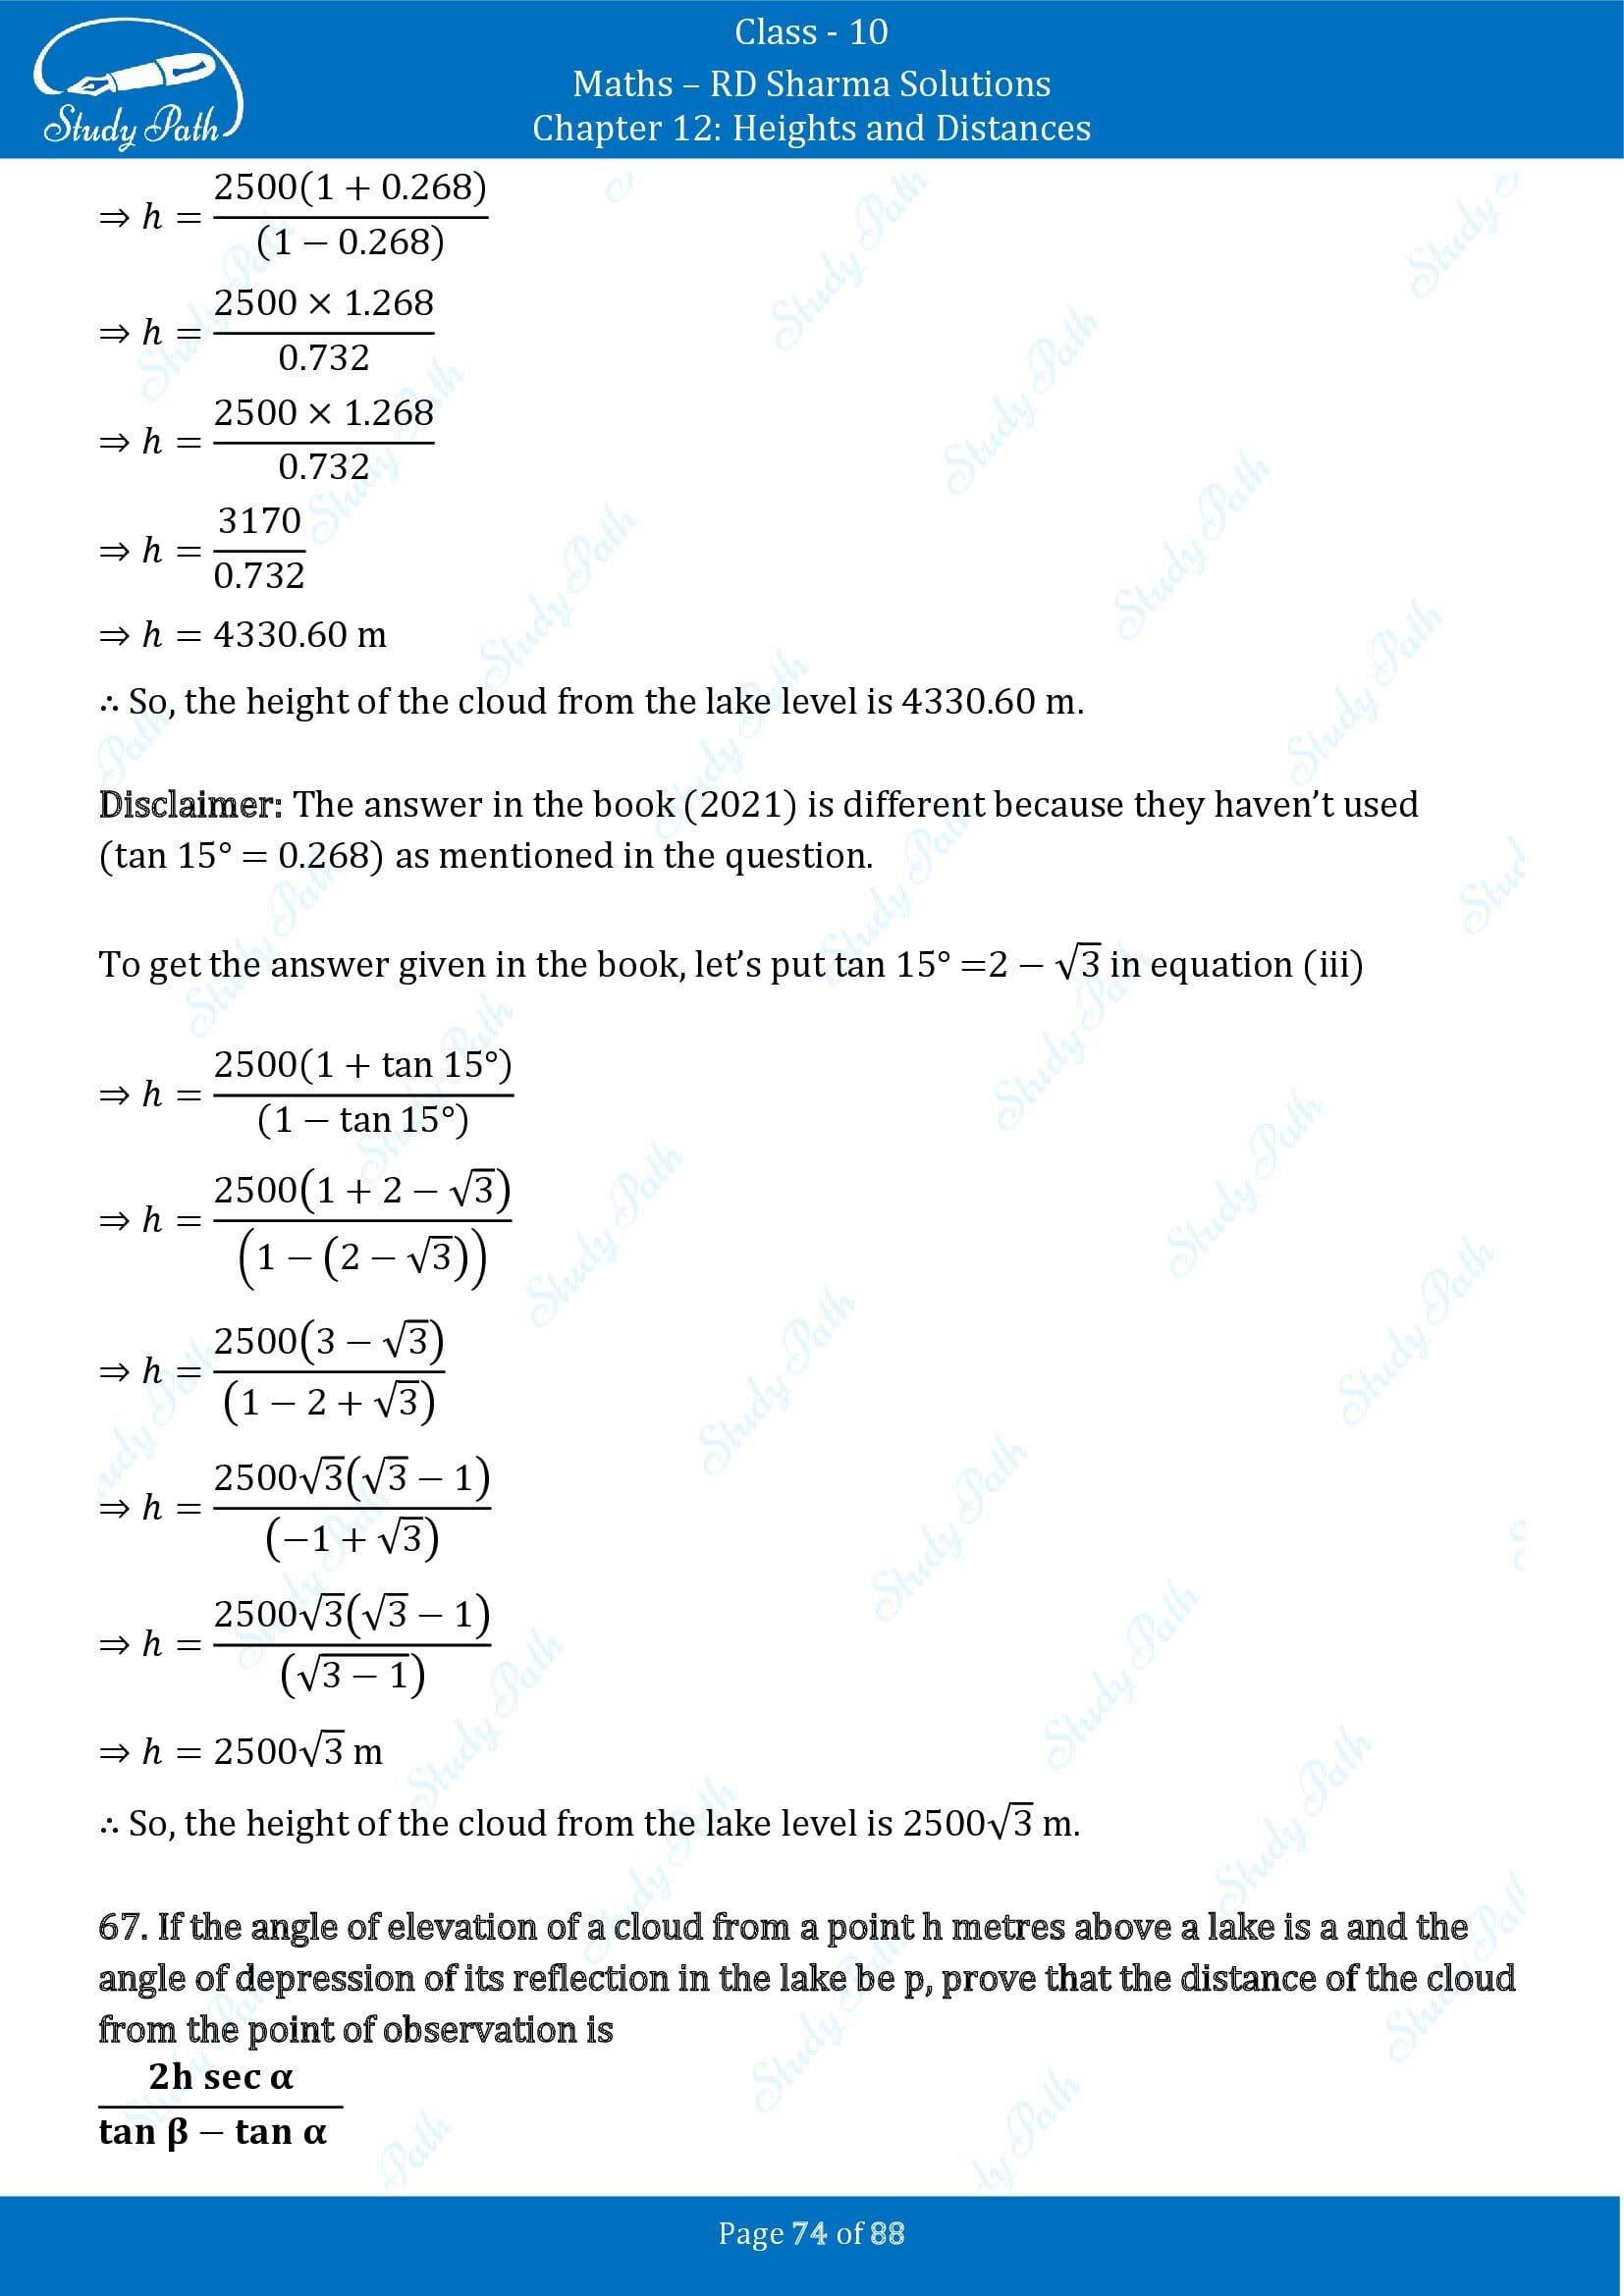 RD Sharma Solutions Class 10 Chapter 12 Heights and Distances Exercise 12.1 00074